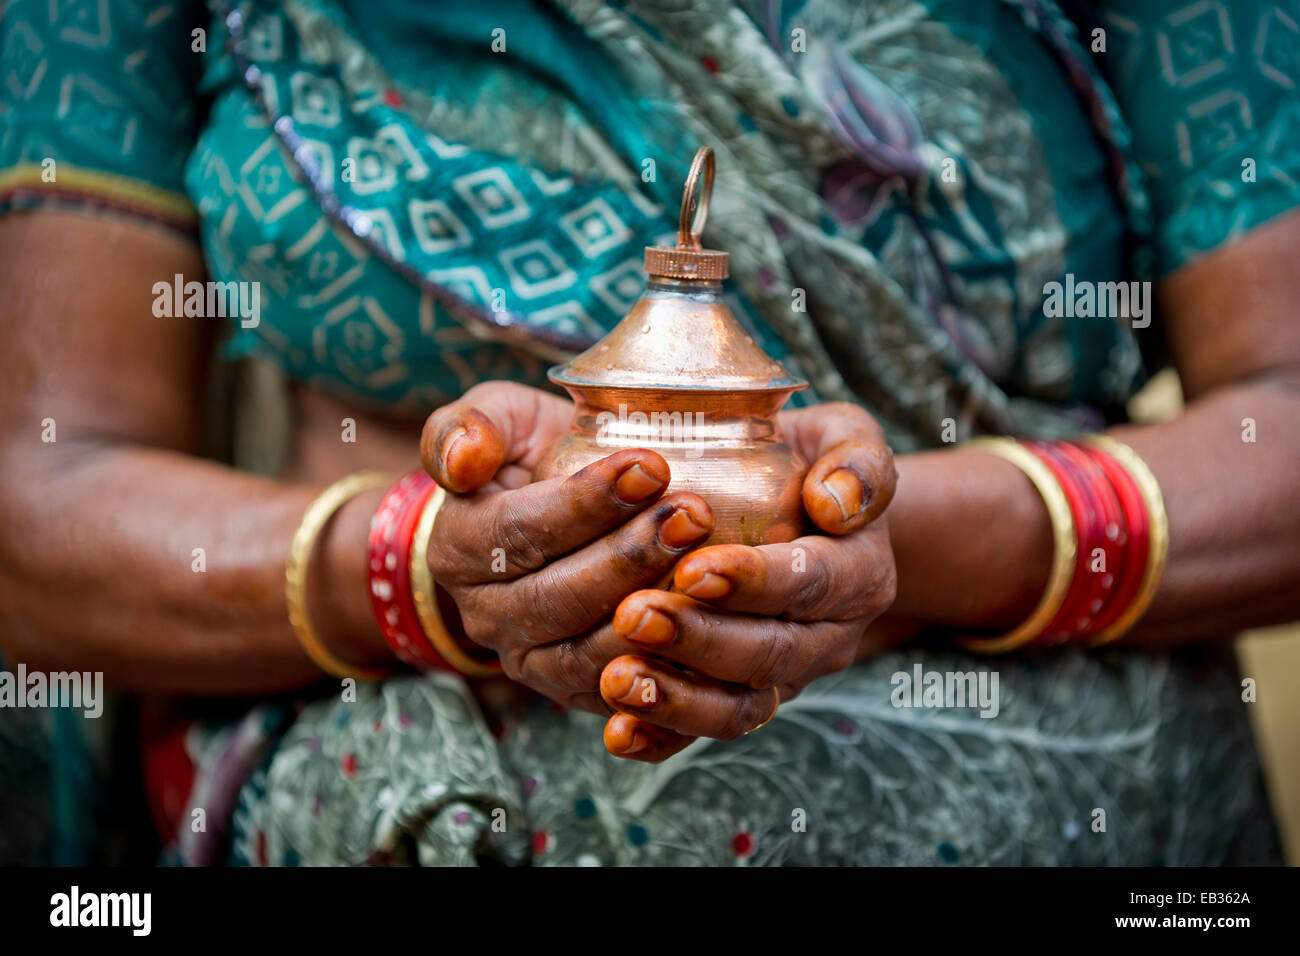 Hands of an Indian woman holding a vessel with holy water, Rameswaram, Pamban Island, Tamil Nadu, India Stock Photo